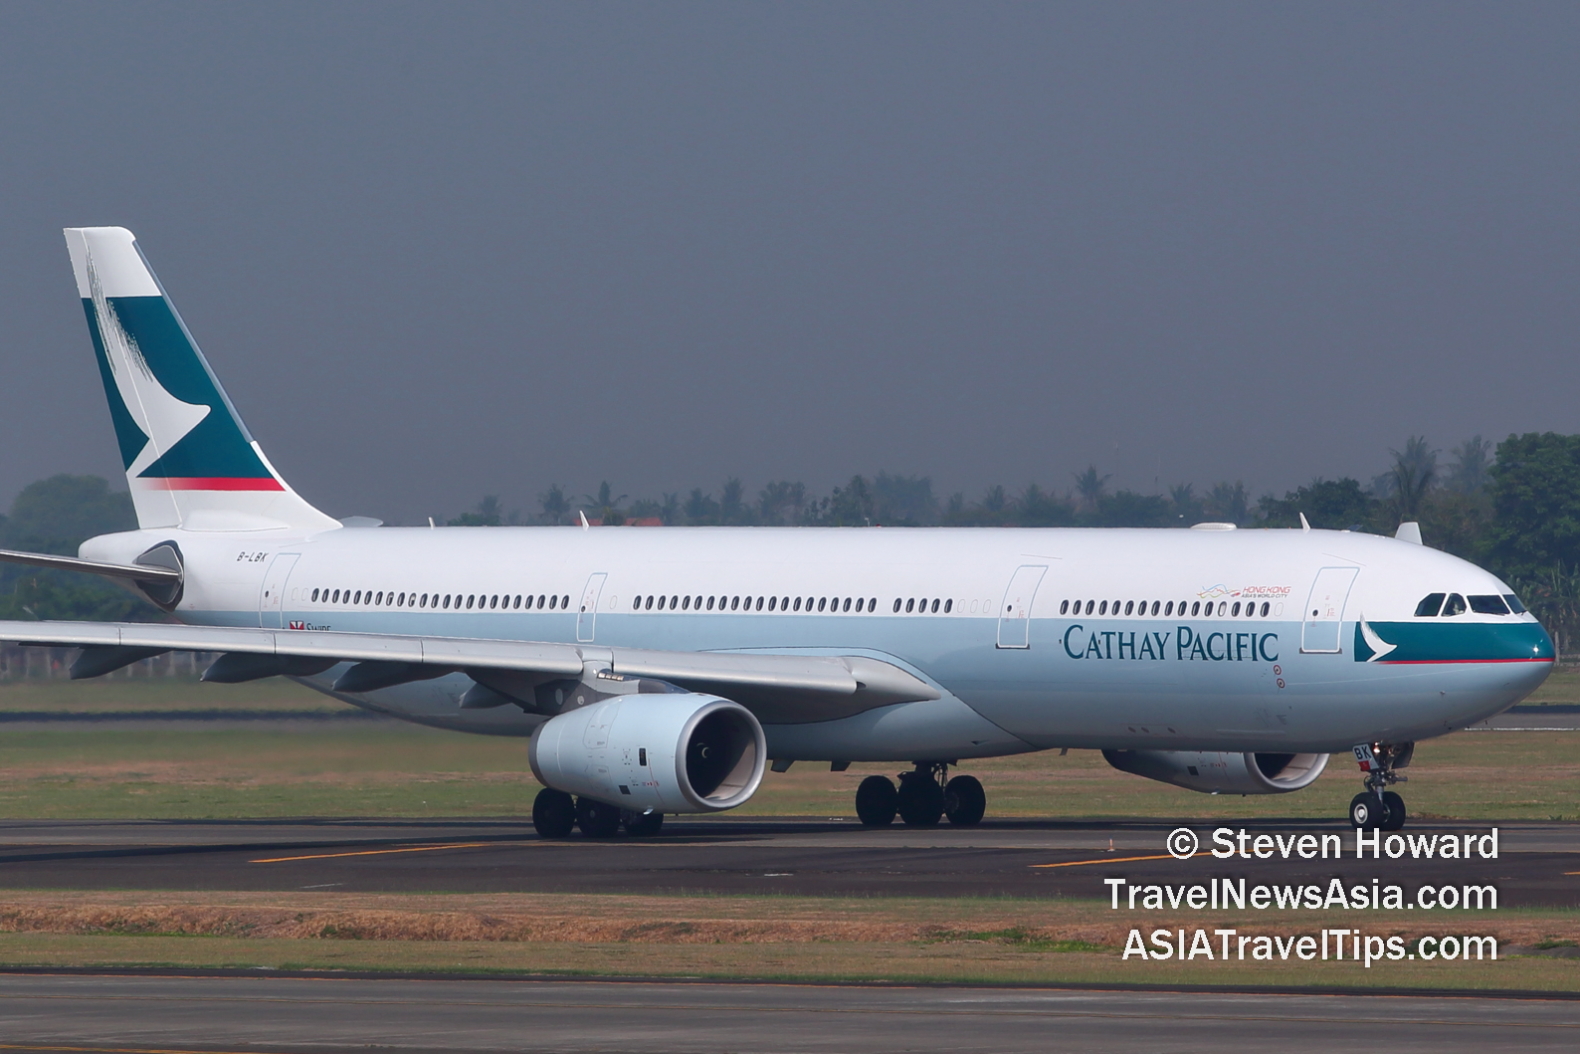 Cathay Pacific A330 reg B-LBK. Picture by Steven Howard of TravelNewsAsia.com Click to enlarge.